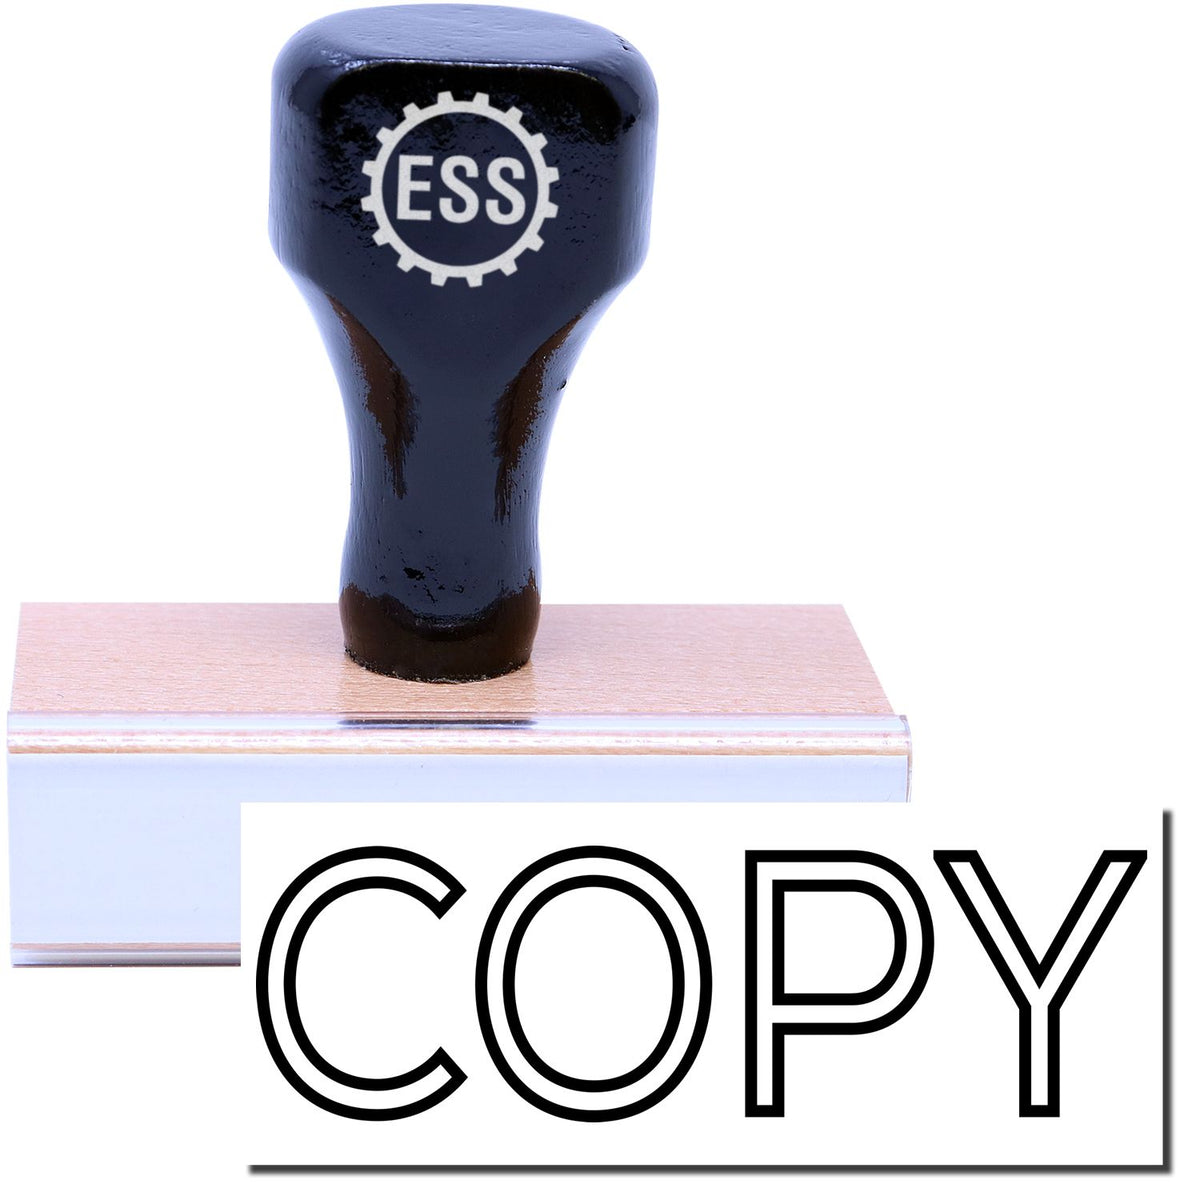 A stock office rubber stamp with a stamped image showing how the text &quot;COPY&quot; in a large outline font is displayed after stamping.